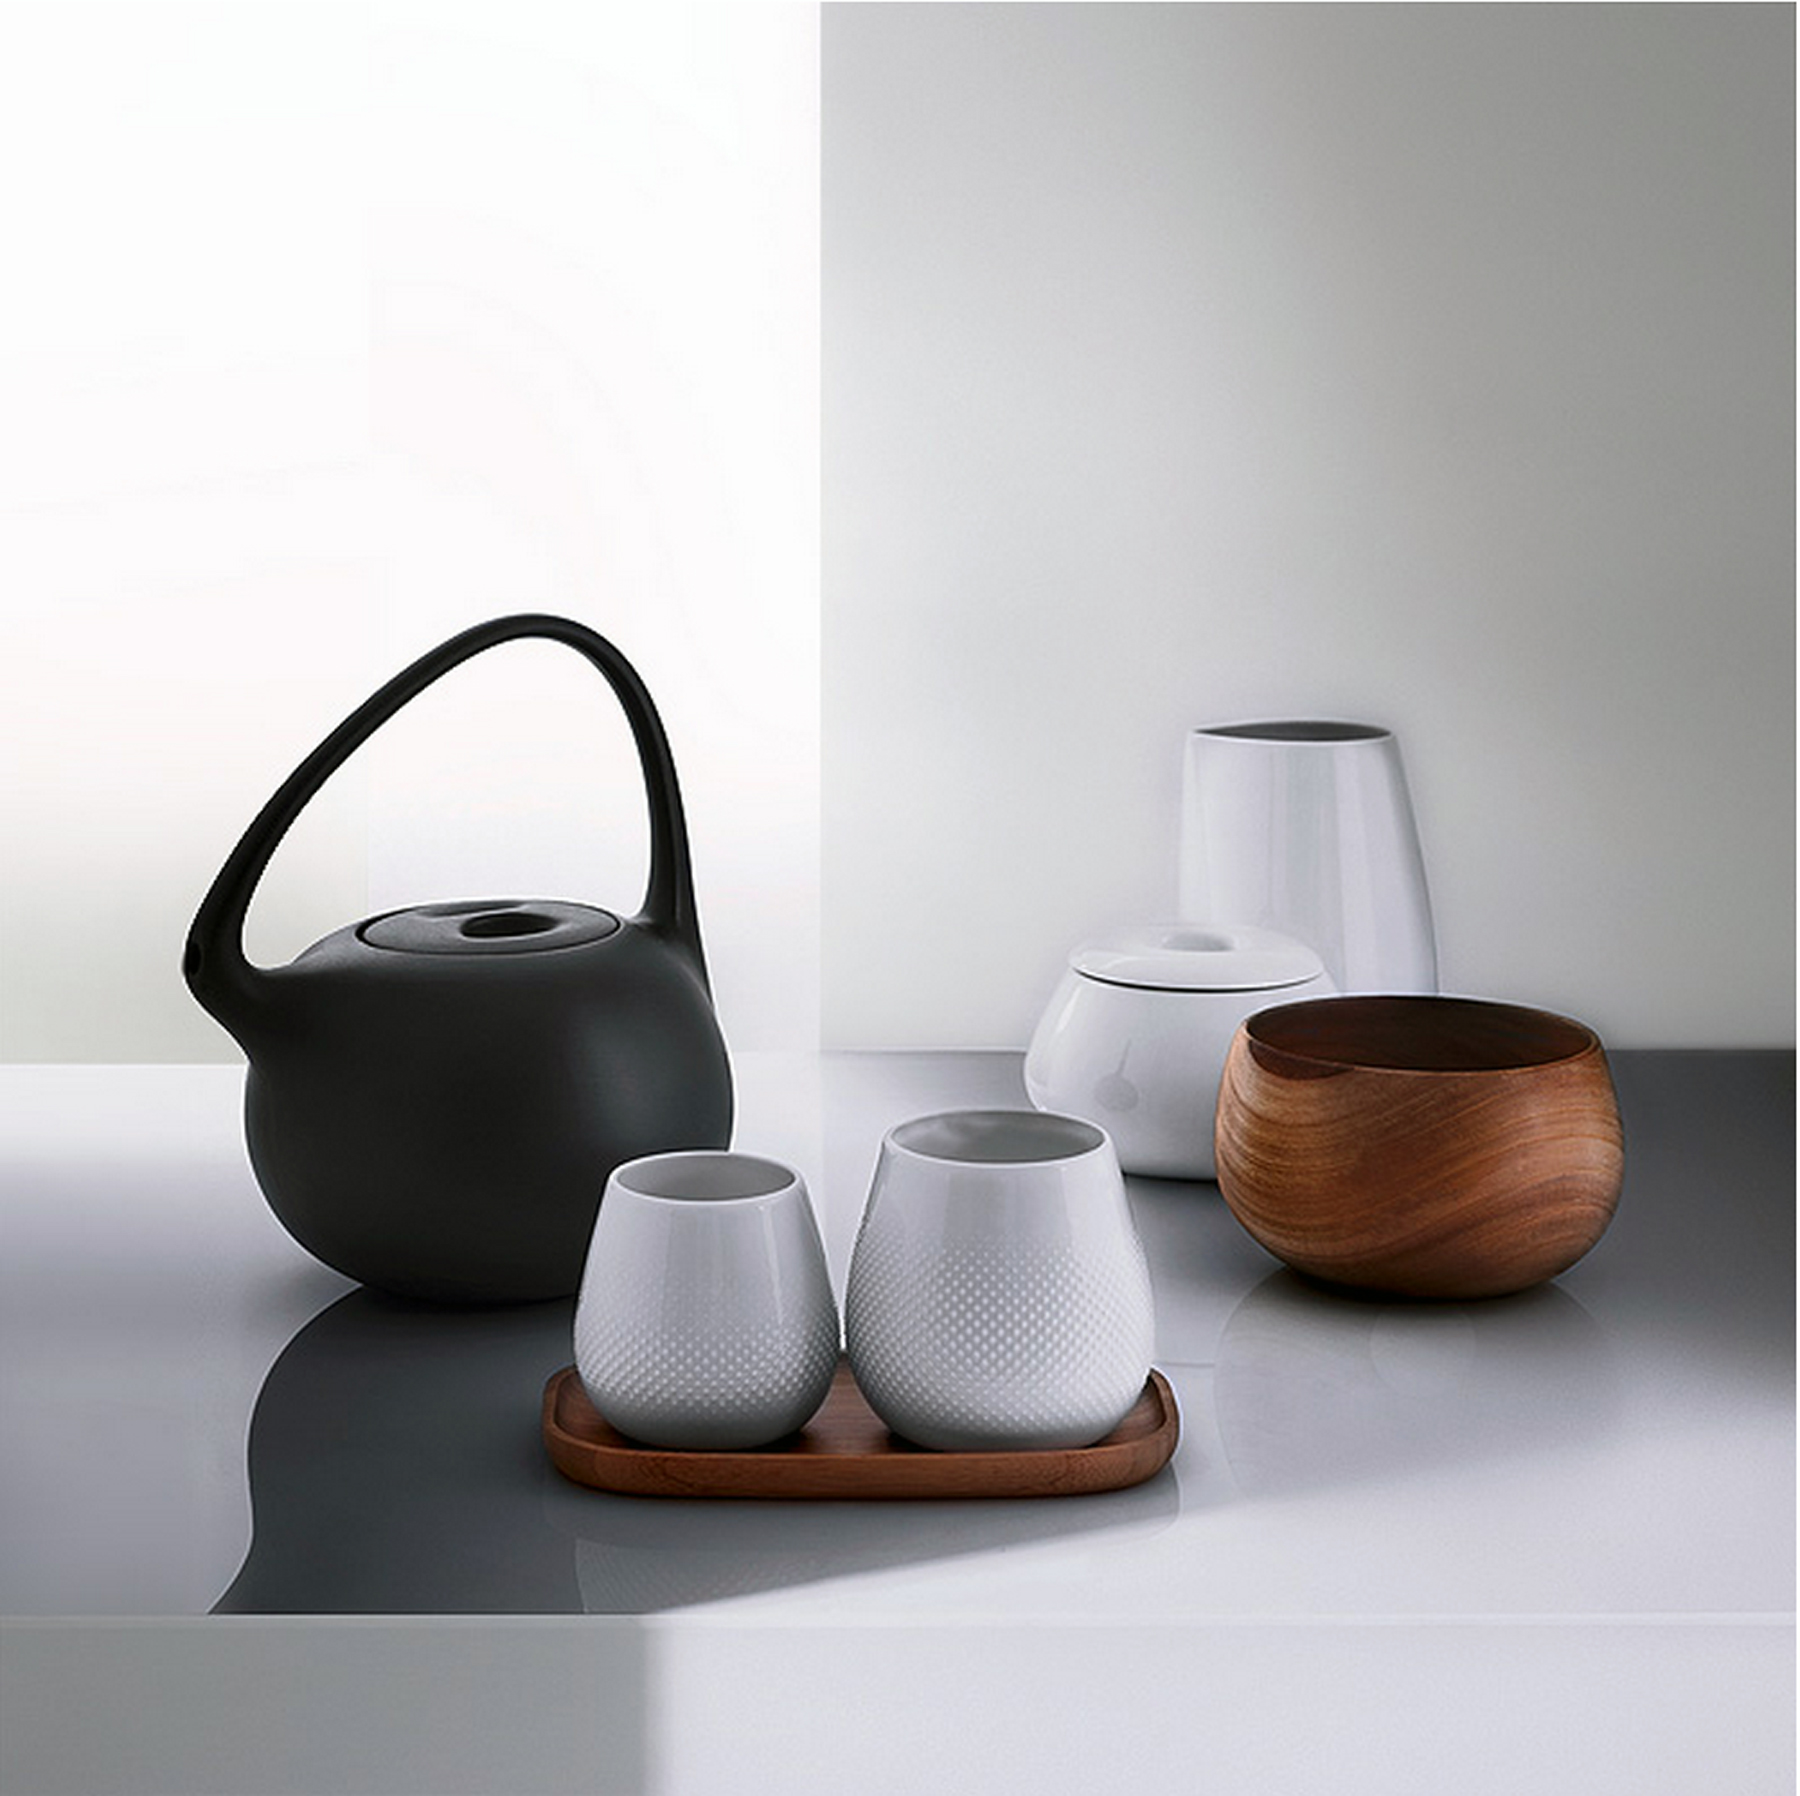 cha by federica capitani for rosenthal.